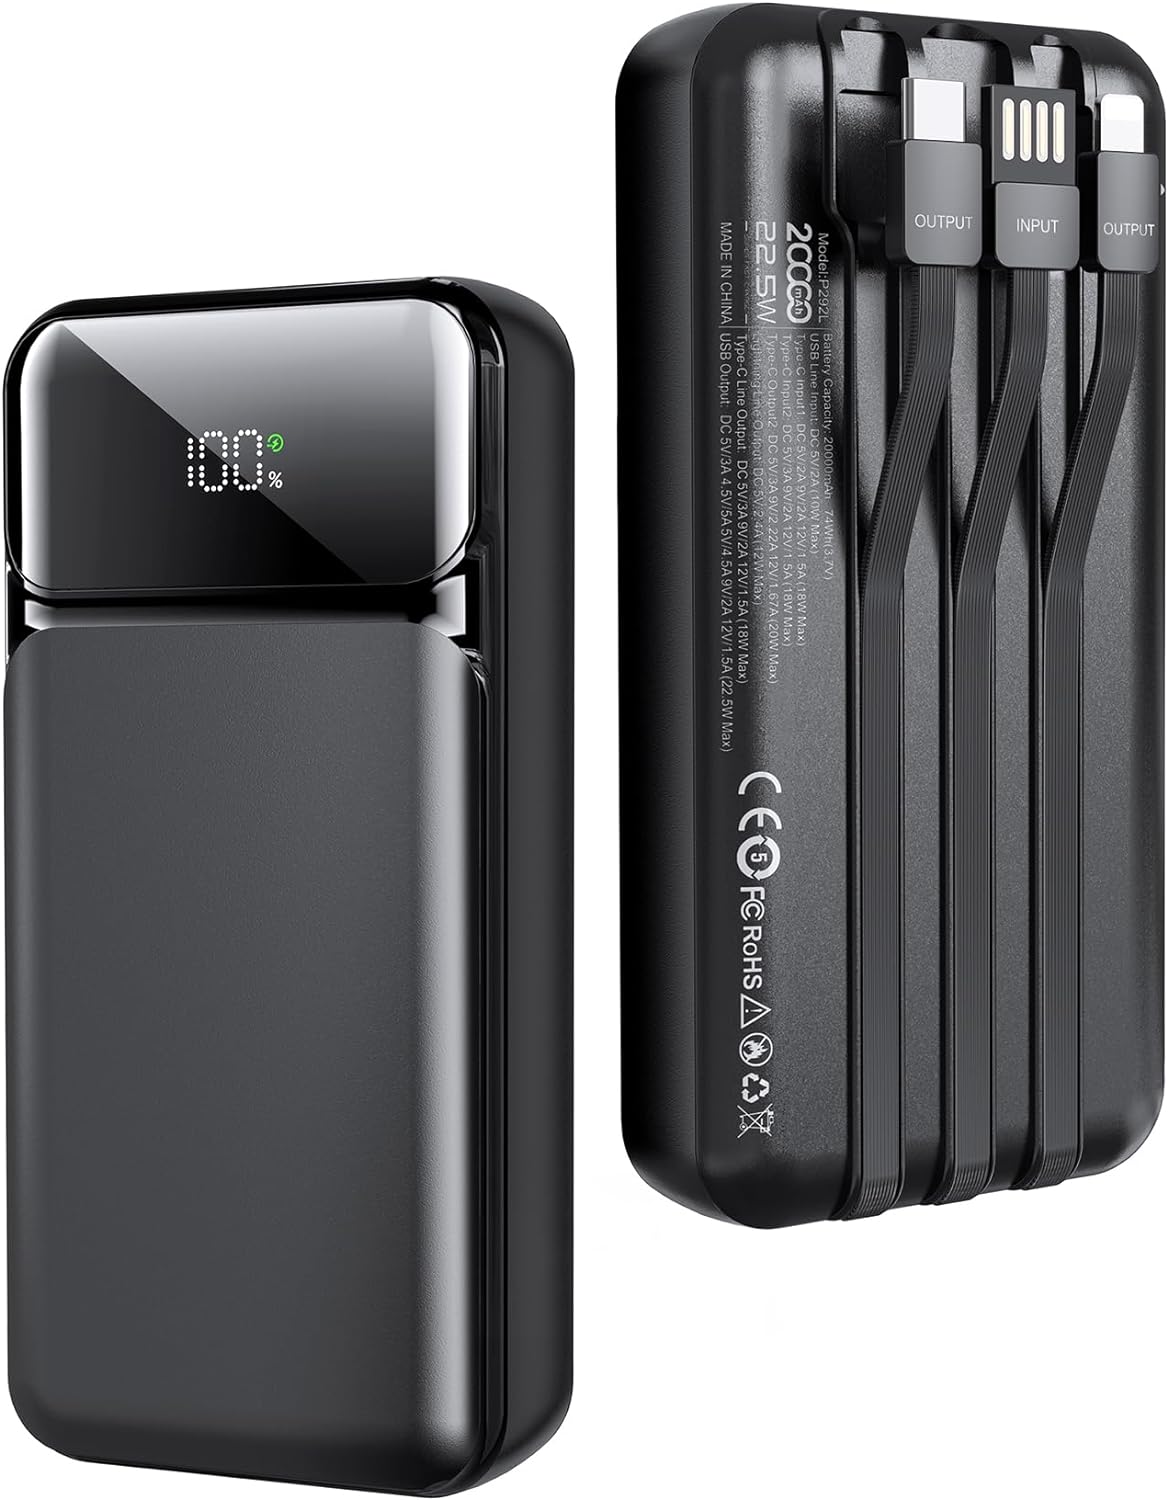 Guowo Portable Charger Power Bank with Built-in Cable, 